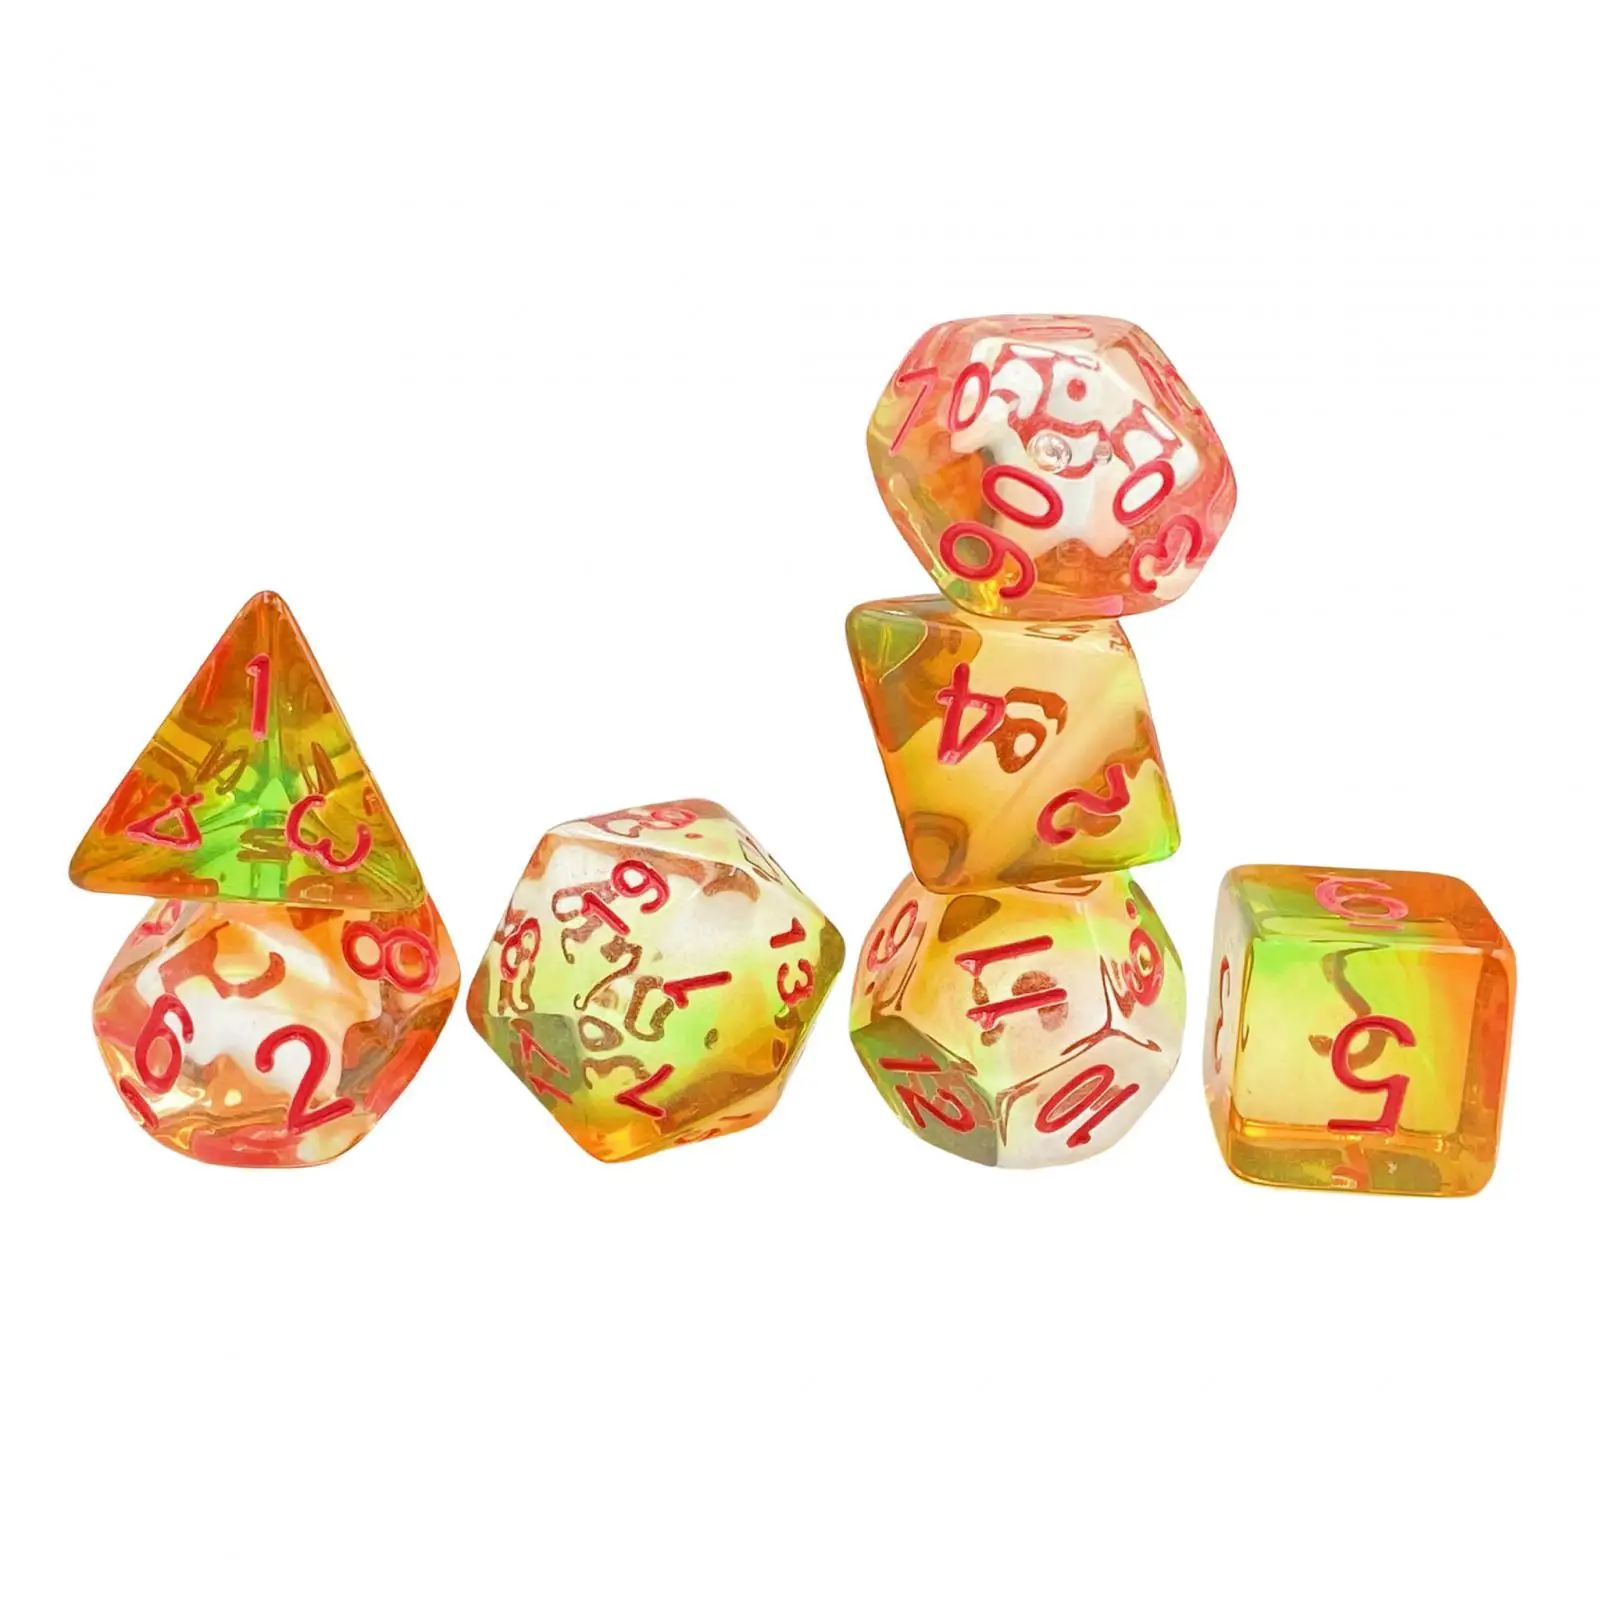 7x Multi Sided Dices Entertainment Toys Polyhedral Dices Acrylic Dices for Party Game Card Game Role Playing Game Board Game